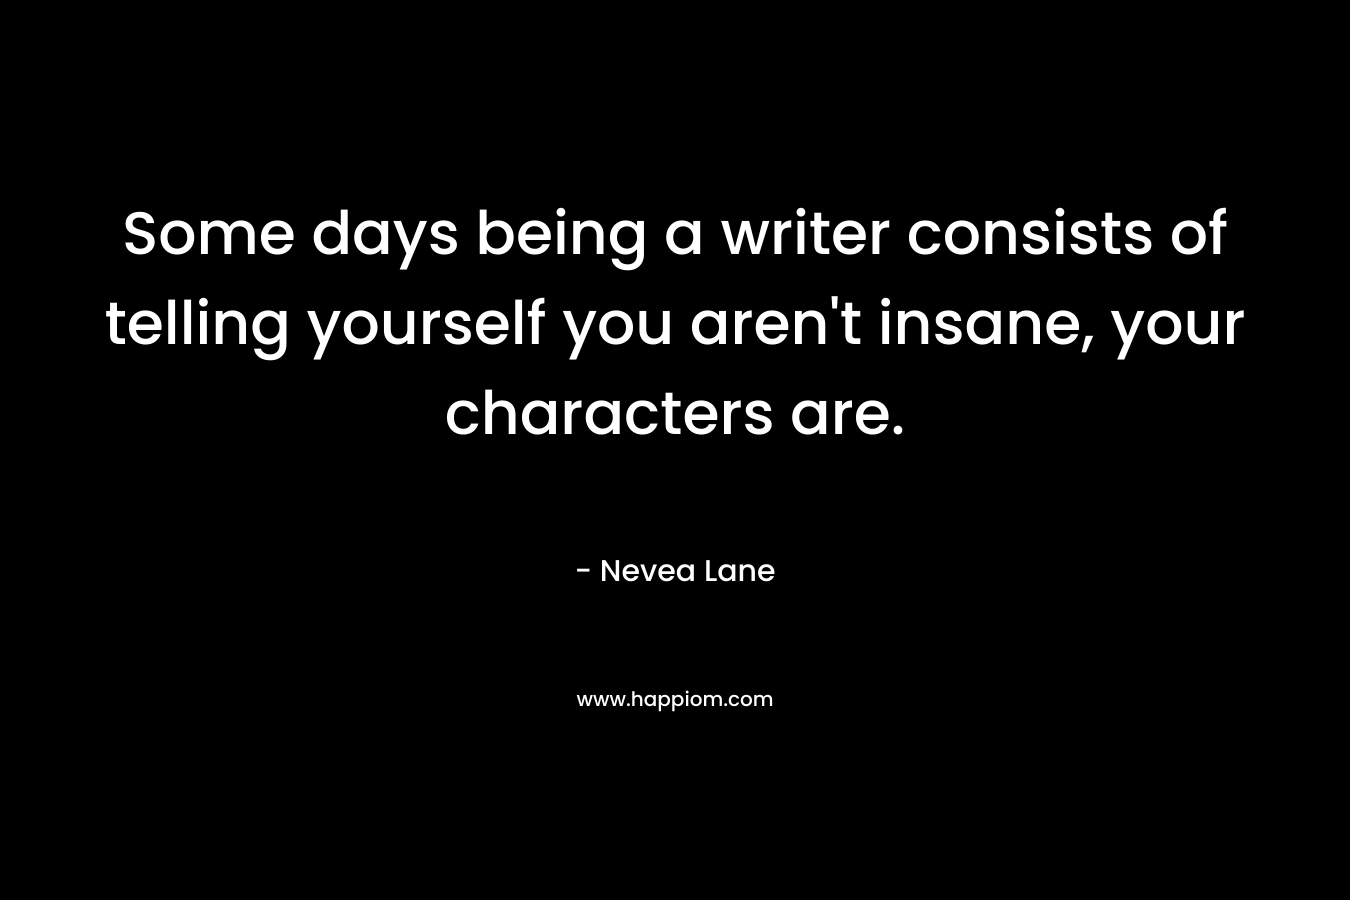 Some days being a writer consists of telling yourself you aren’t insane, your characters are. – Nevea Lane